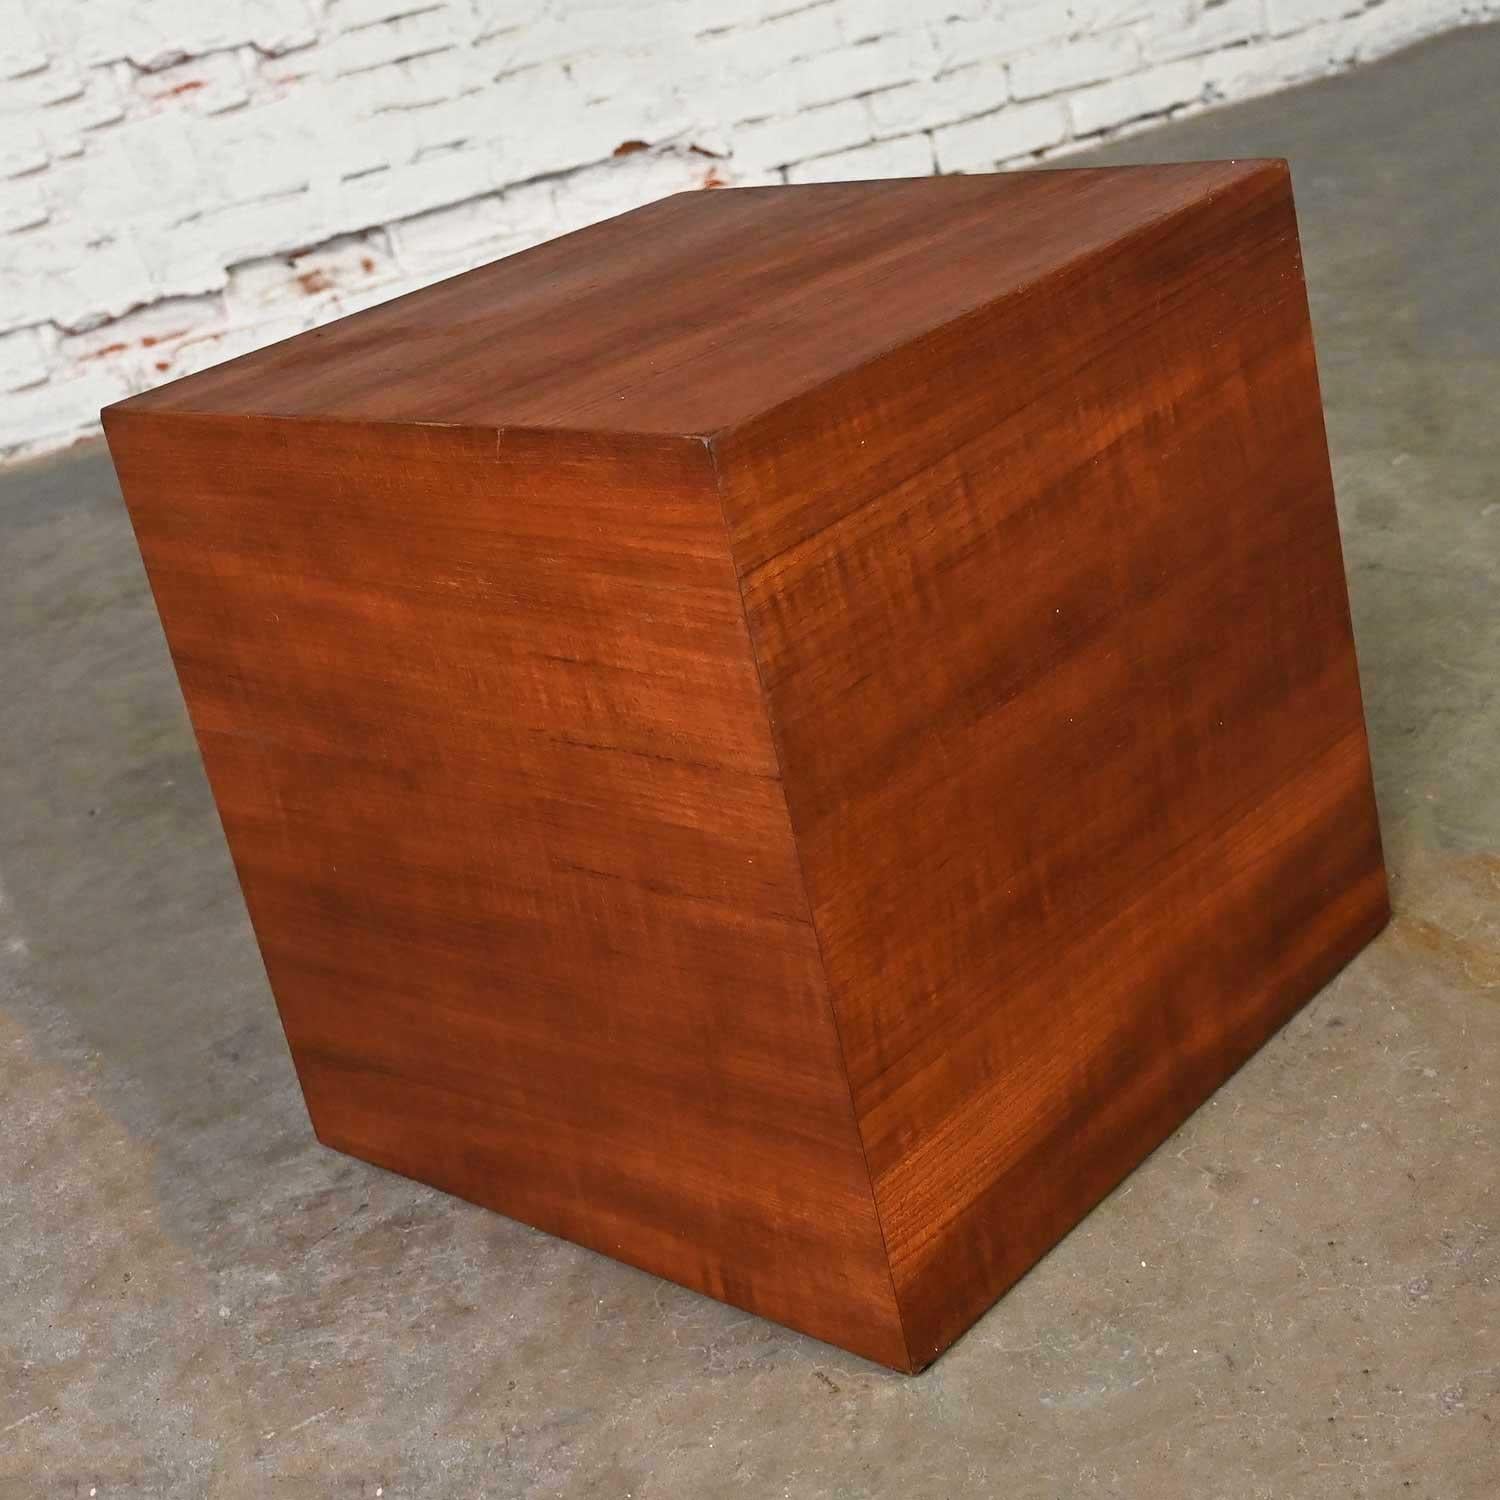 20th Century MCM to Scandinavian Modern Teak Veneer Cube Side End Table or Magazine Container For Sale